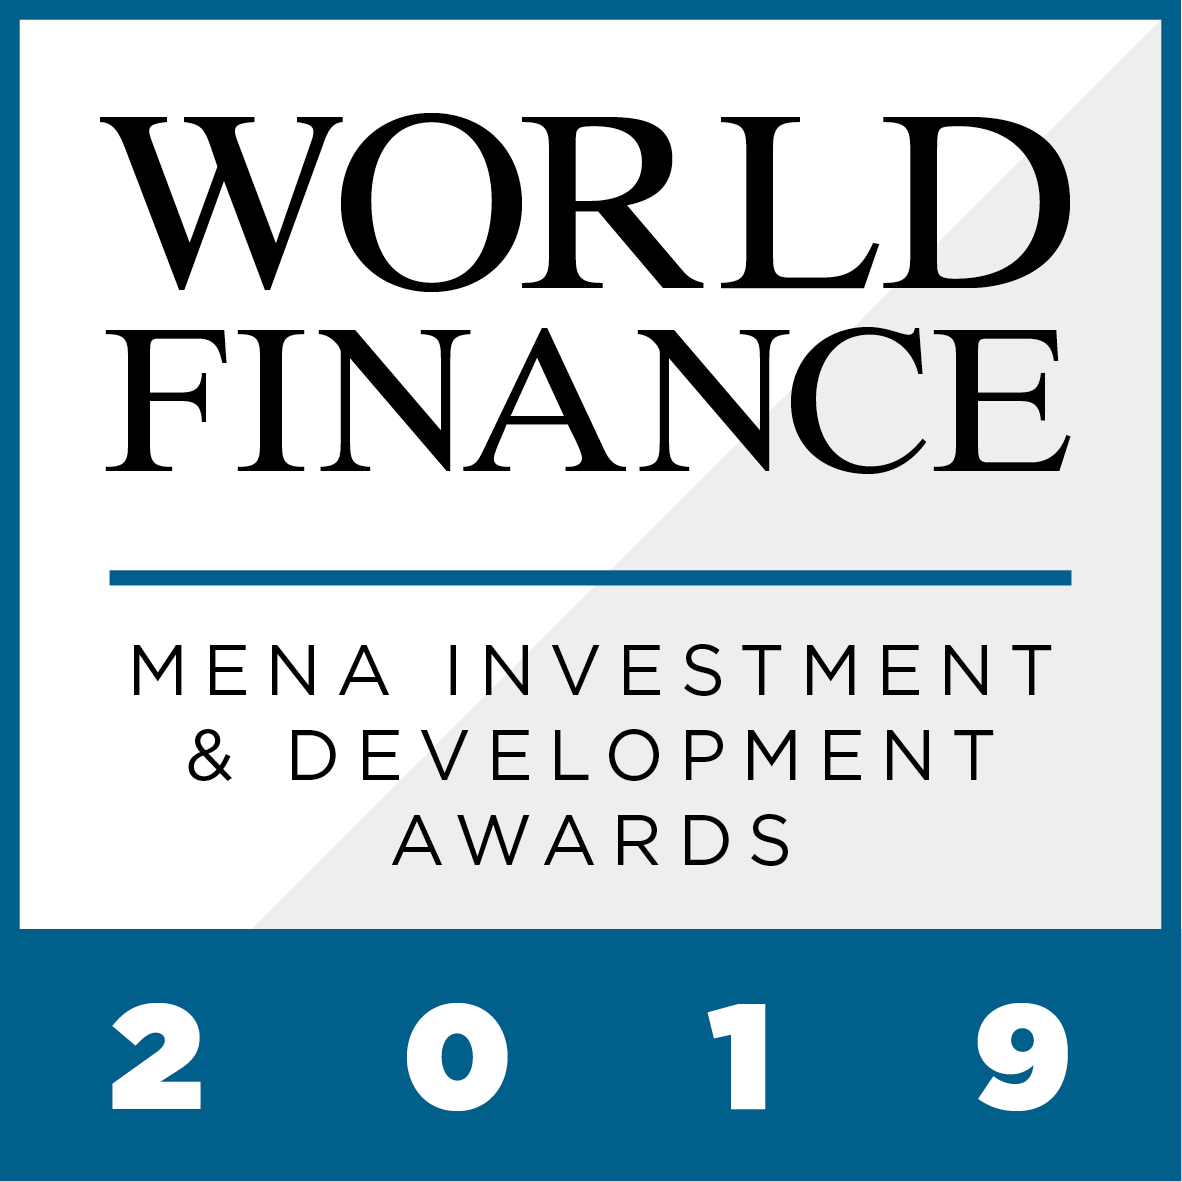 The situation for the MENA region in 2019 has remained skewed to the downside. A wealth of factors including volatility in oil prices, US sanctions on Iran and public-sector debt burdens are impeding development, while conflicts in countries such as Libya have brought investment to a halt